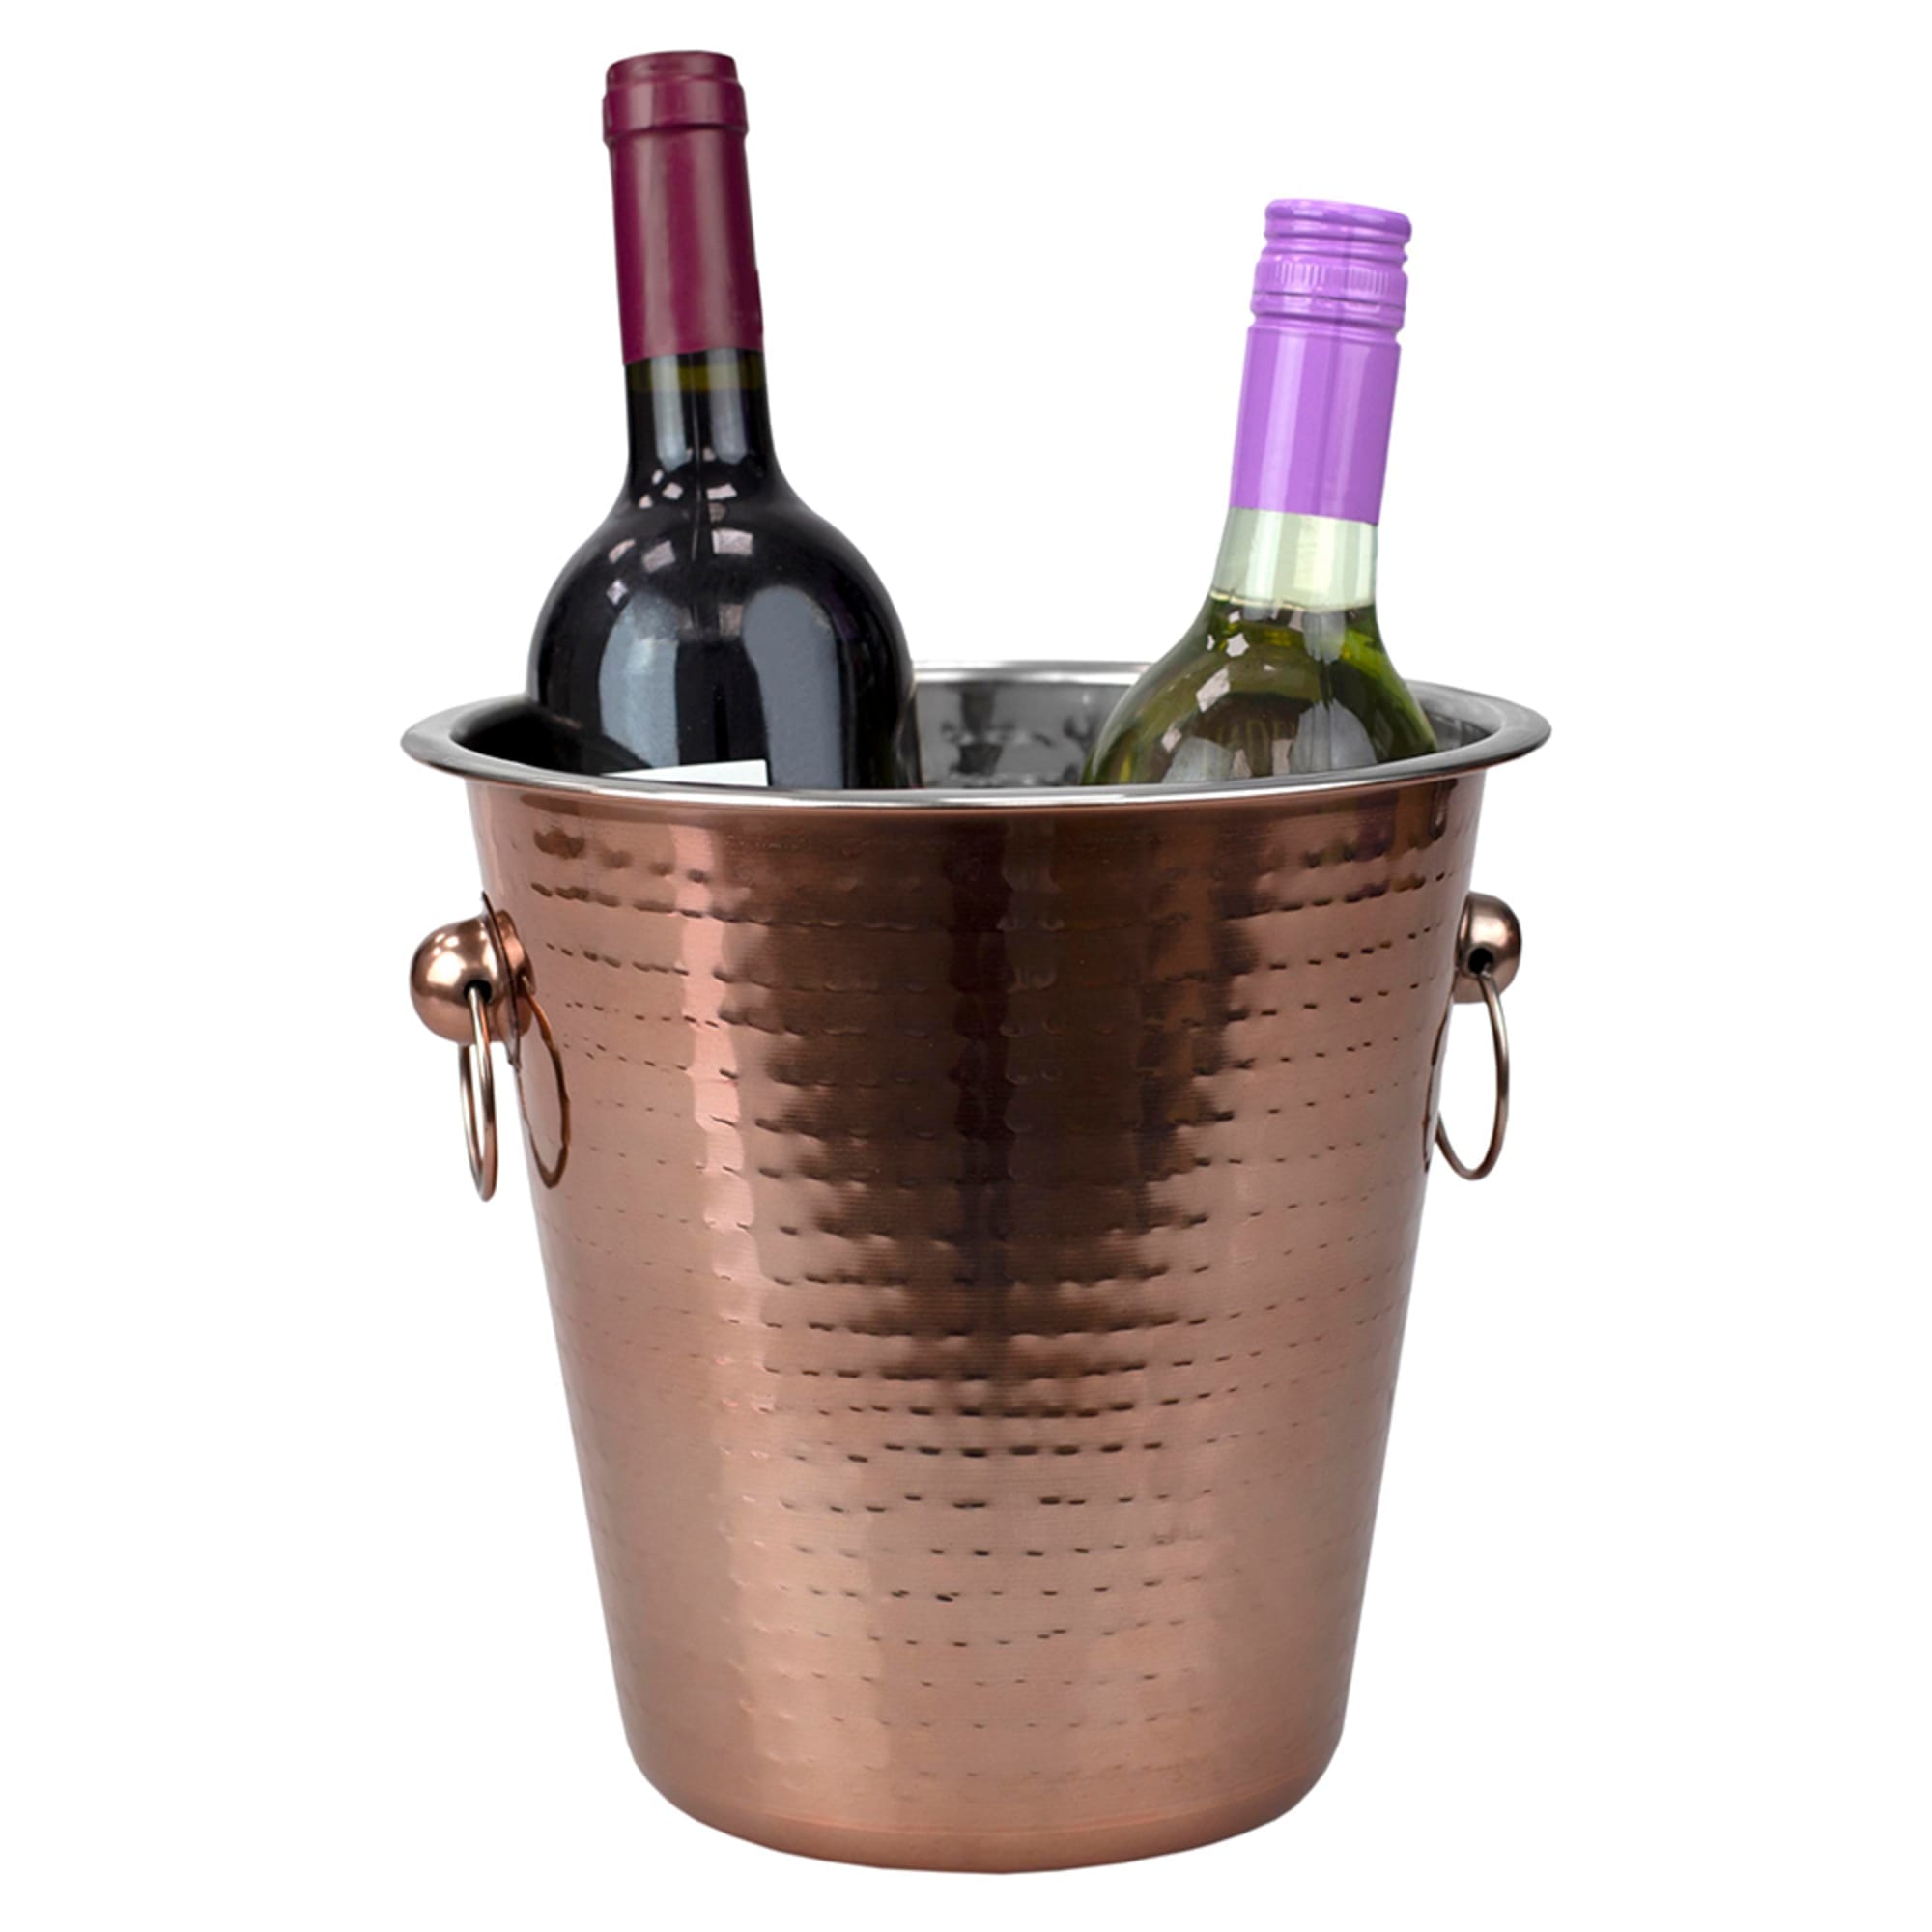 Home Basics 4 Qt Hammered Steel Ice and Beverage Storage Bucket with  Ring Handles, Copper $10 EACH, CASE PACK OF 12